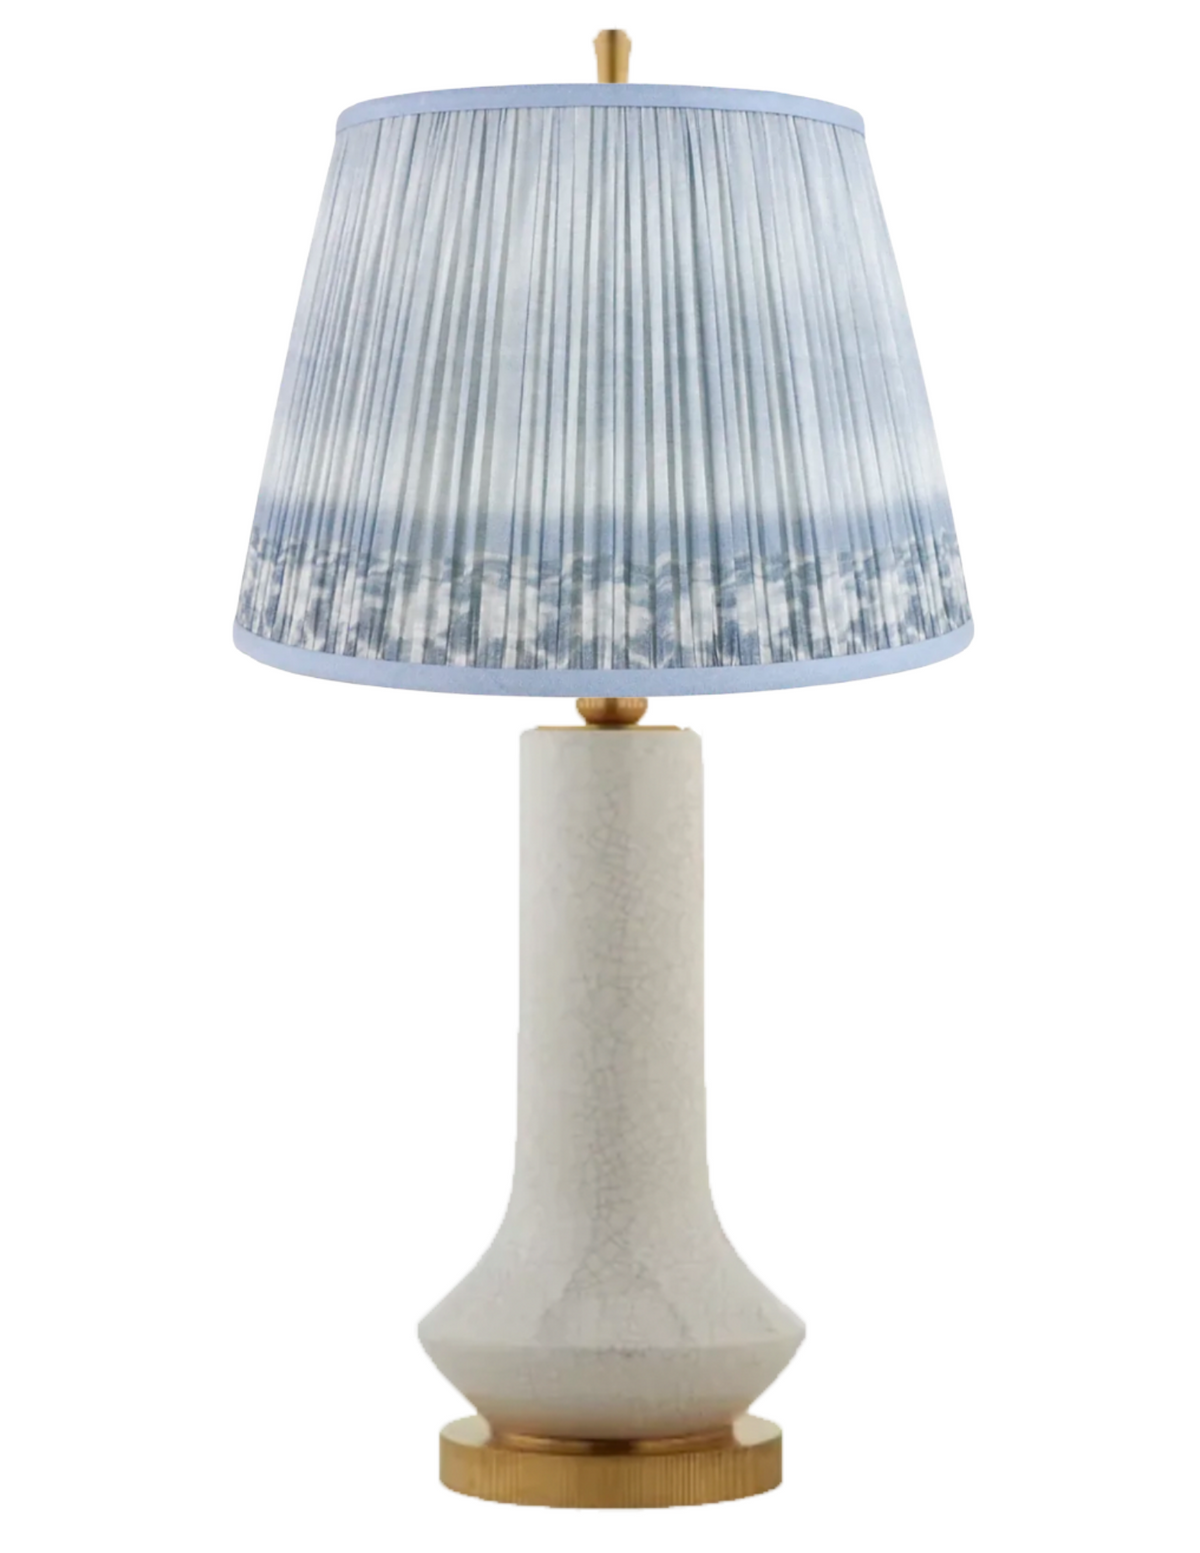 Ikat Shade in Blue